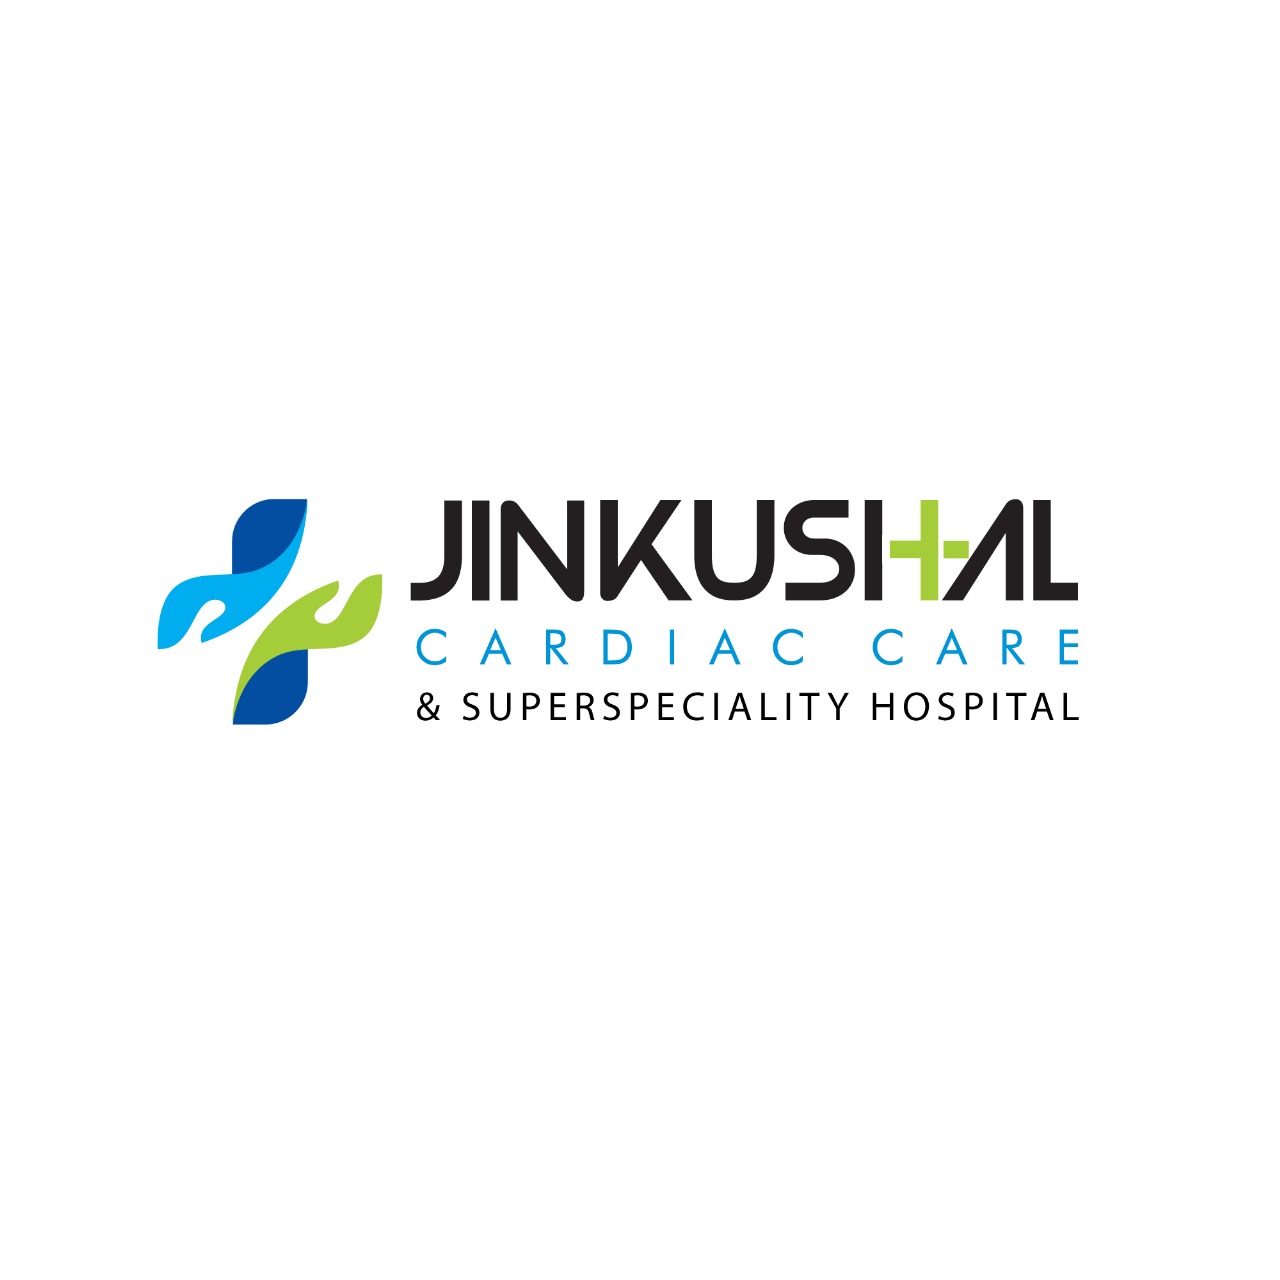 Jinkushal Cardiac Care & Superspeciality Hospital|Dentists|Medical Services